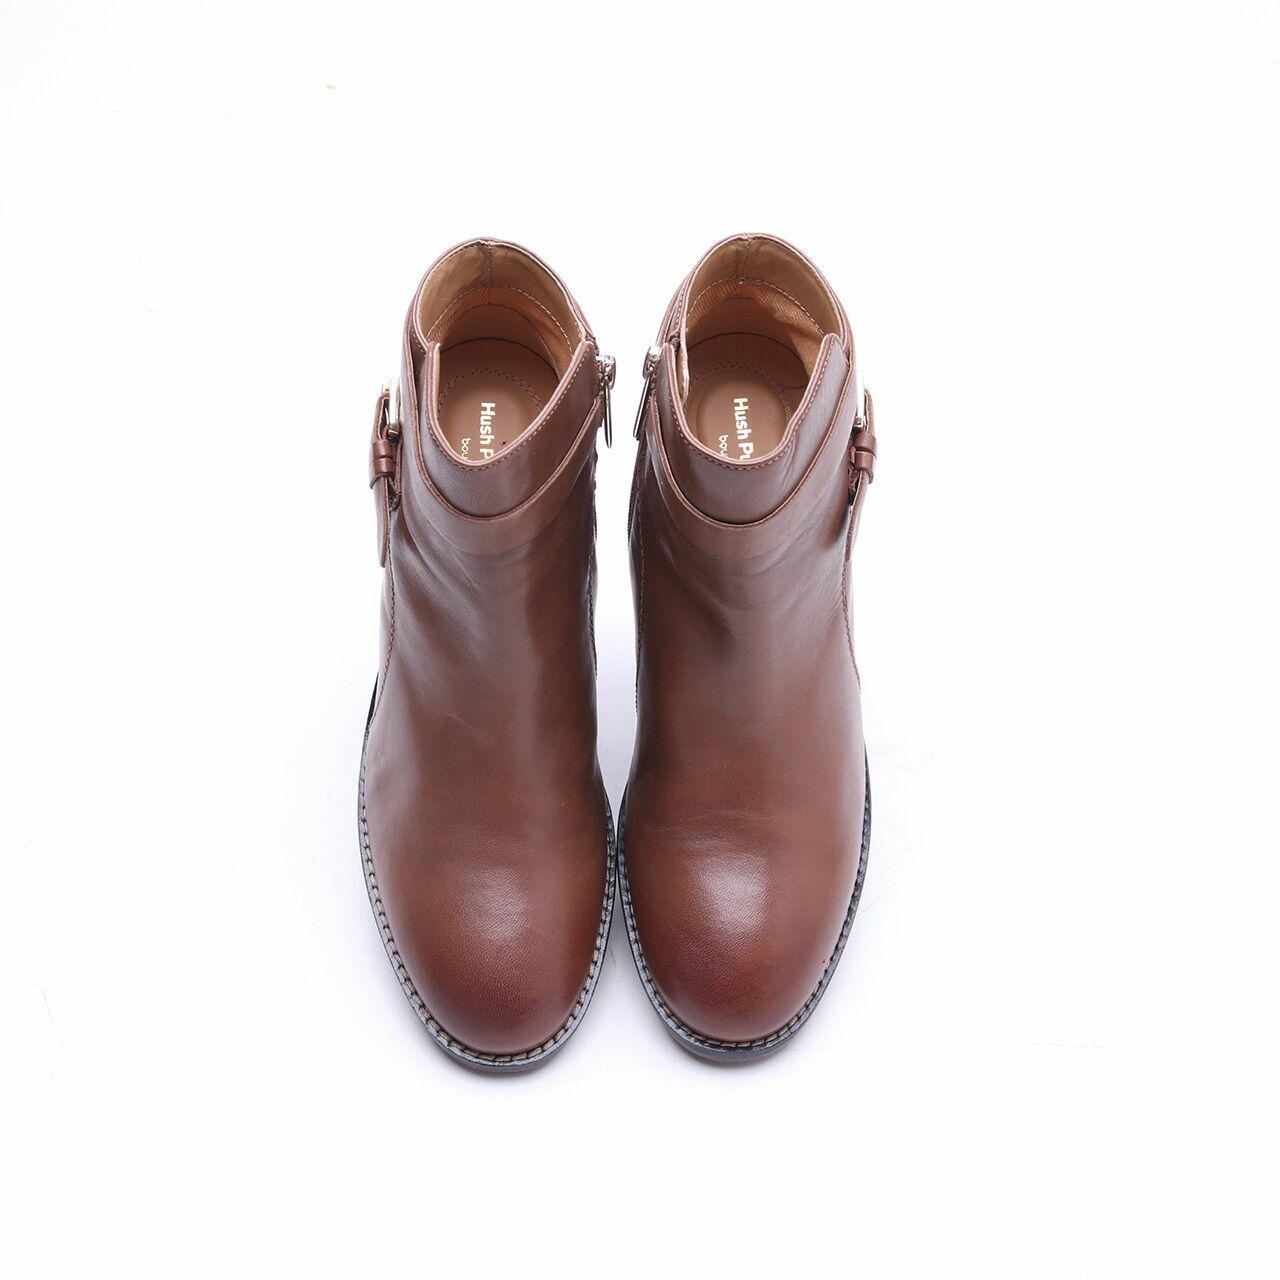 Hush Puppies Brown Boots